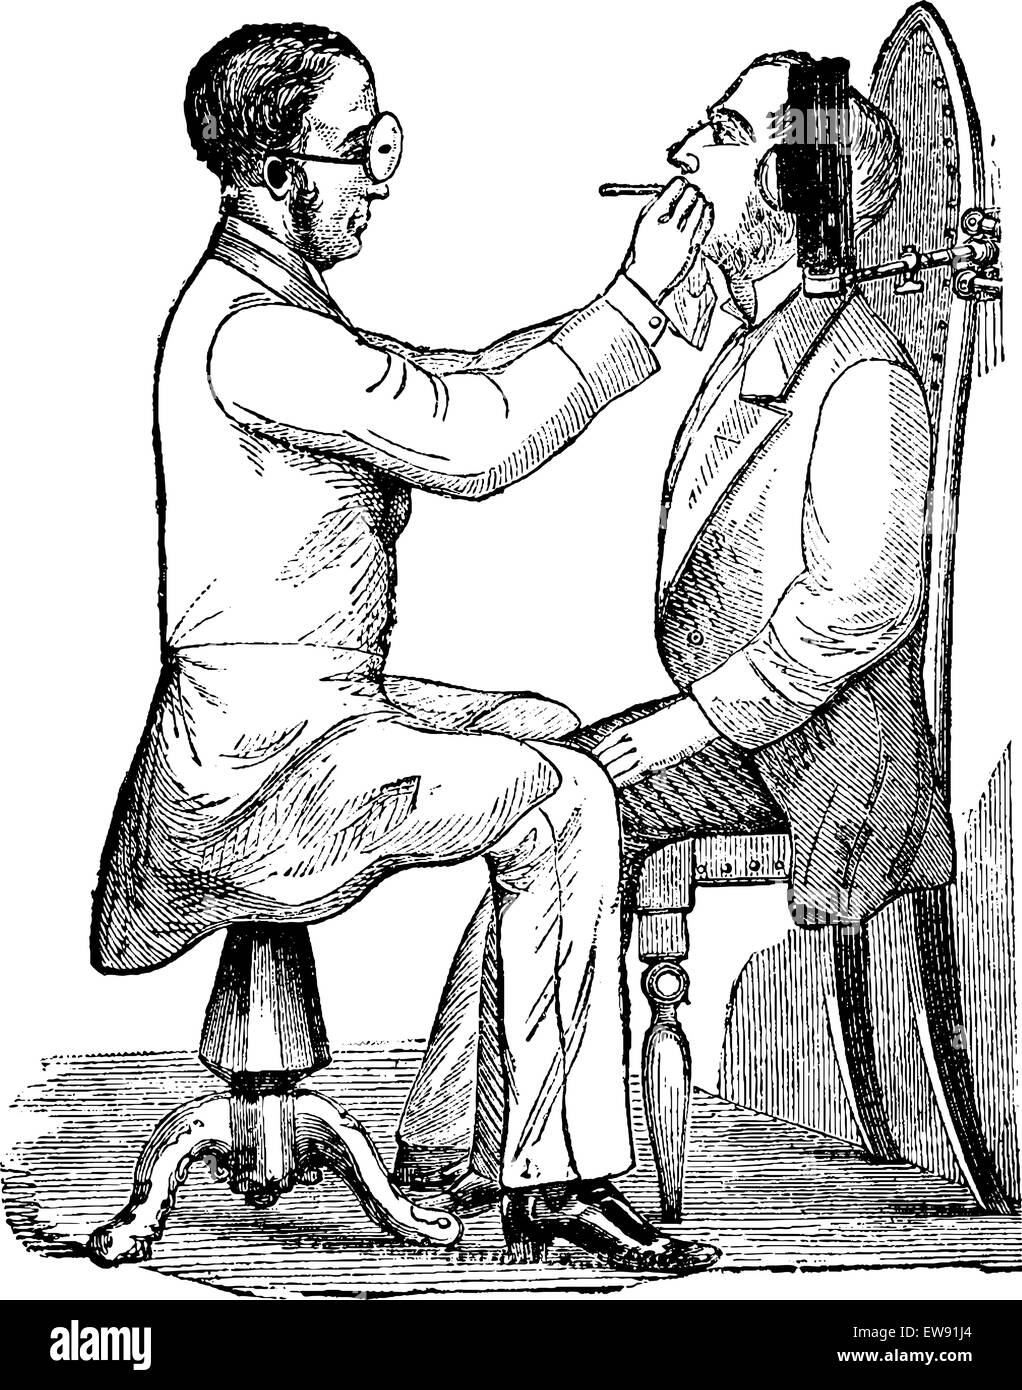 Laryngoscopy, showing a doctor looking into a patient's mouth, illuminated by indirect light from a gas lamp, vintage engraved i Stock Vector